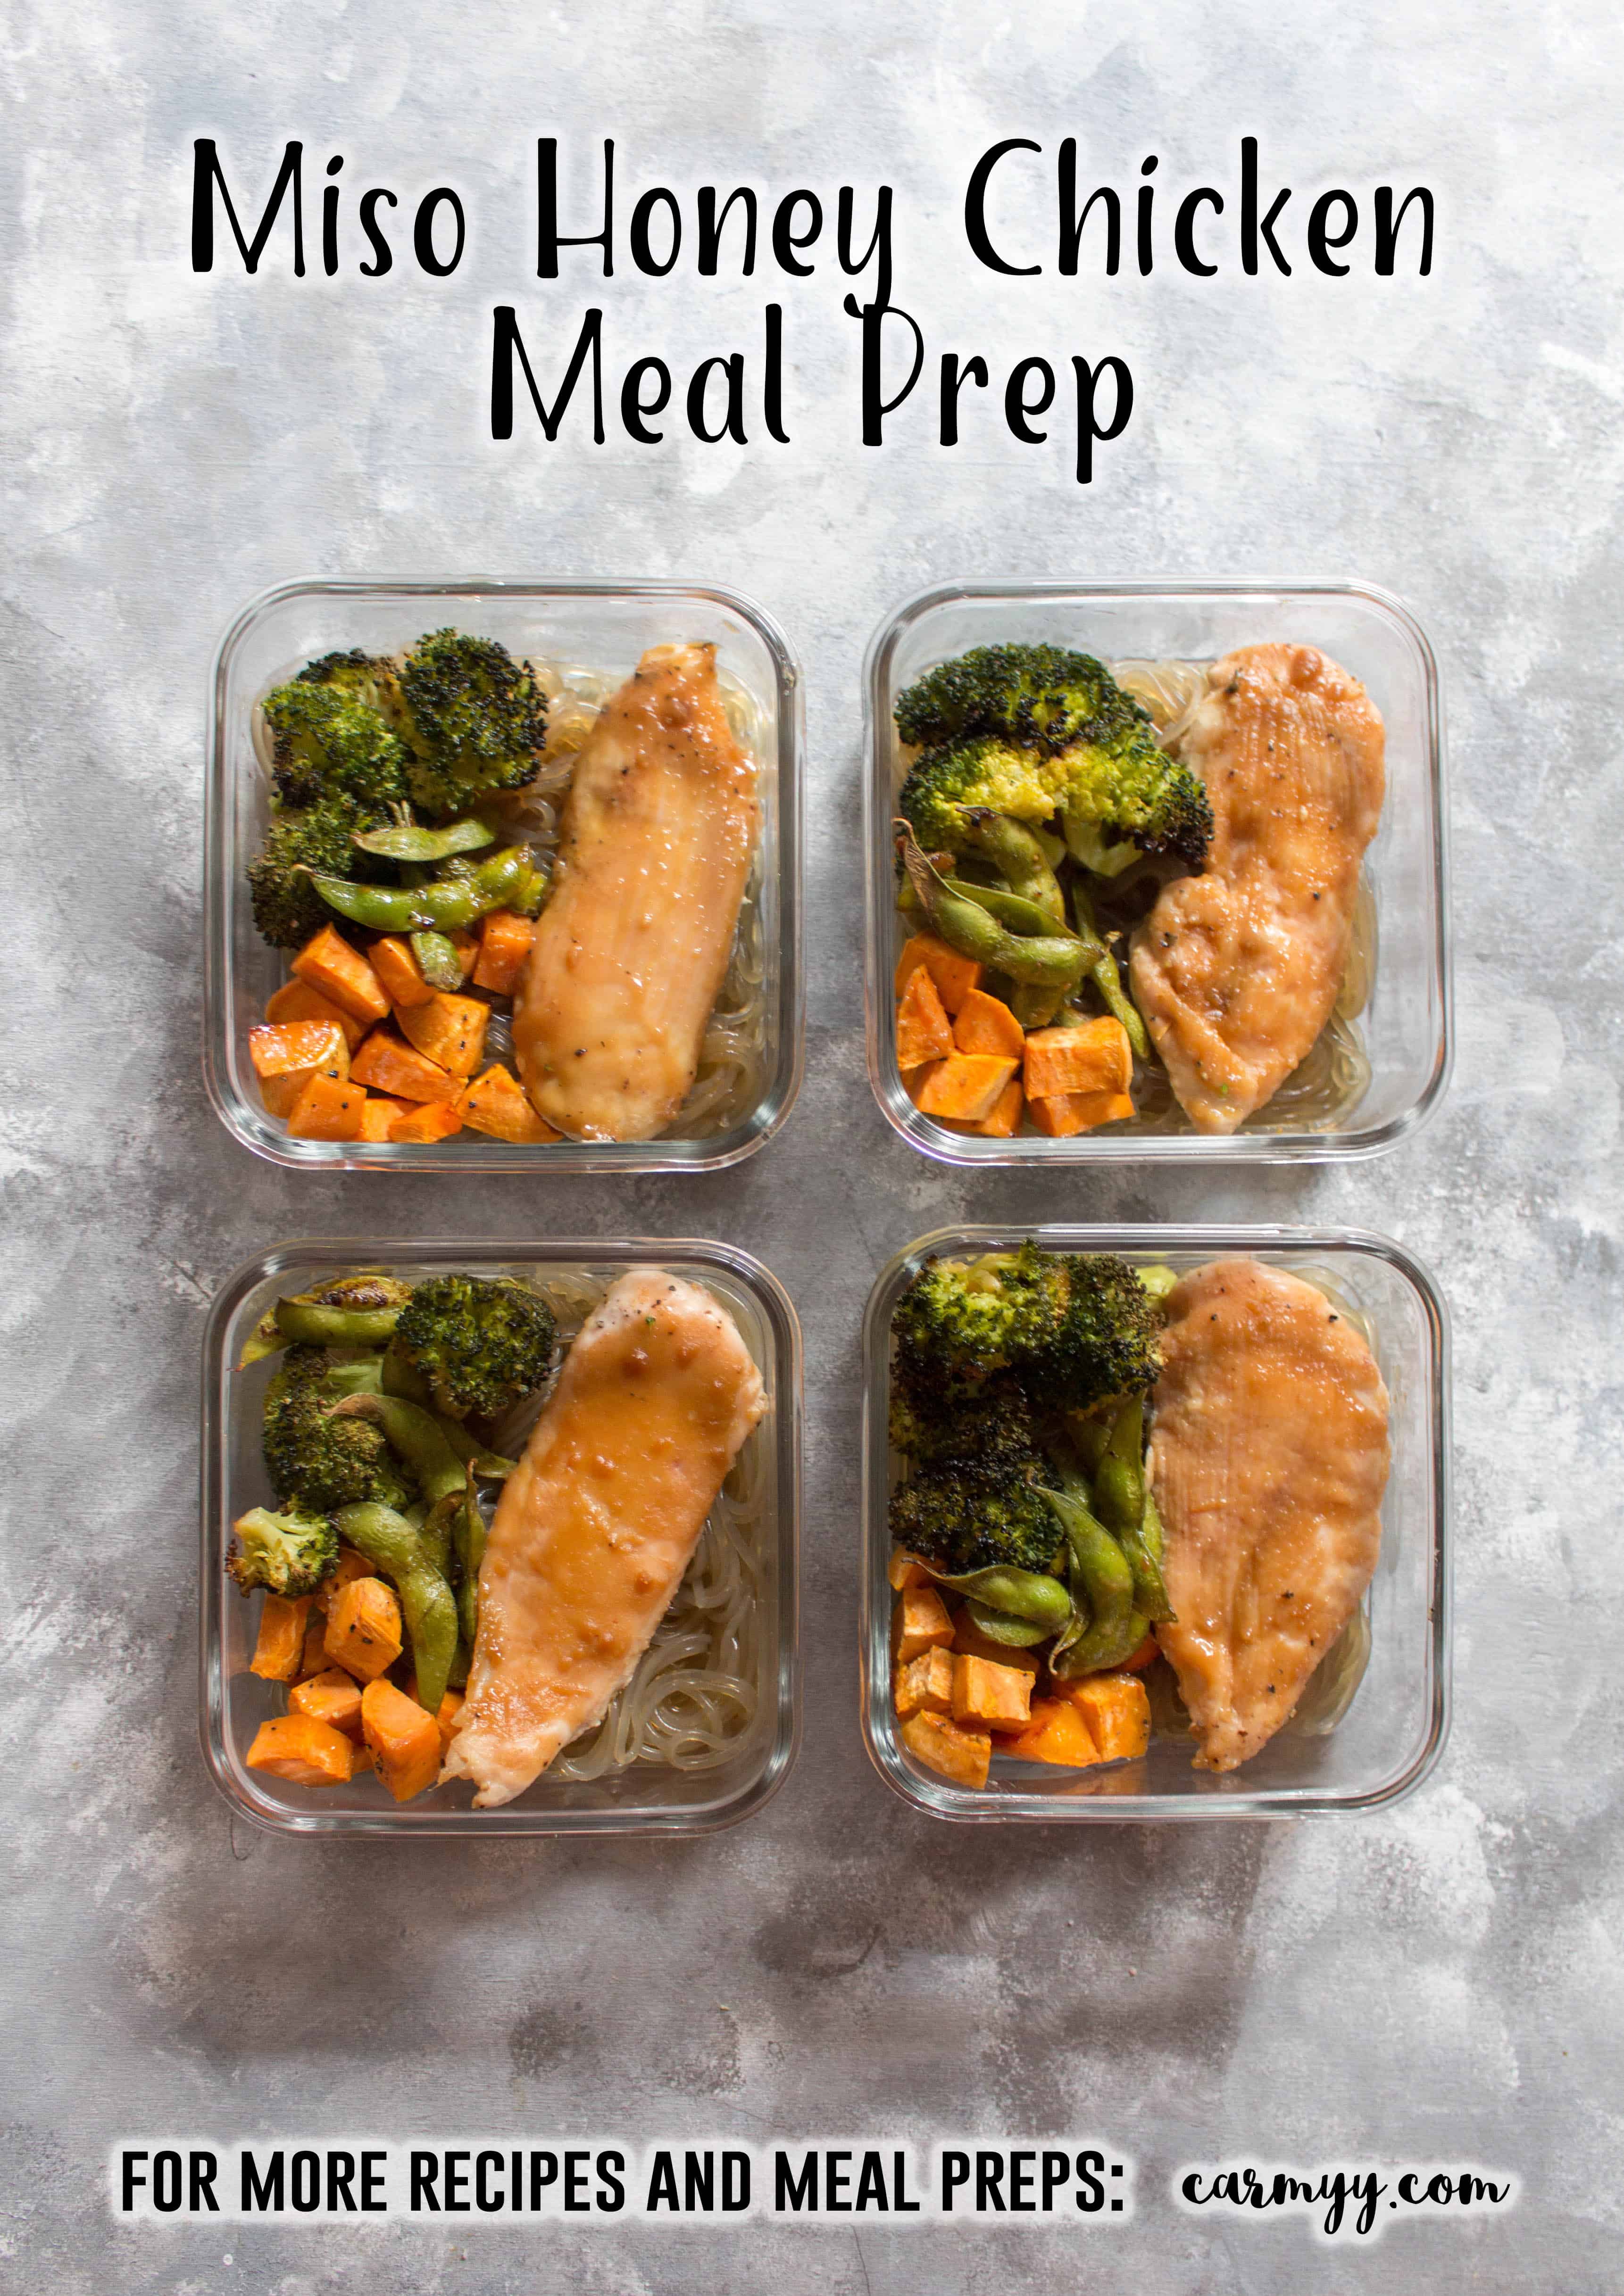 This Miso Honey Chicken Meal Prep is an easy and delicious sheet pan meal prep that takes less than 40 minutes to put together and bake!